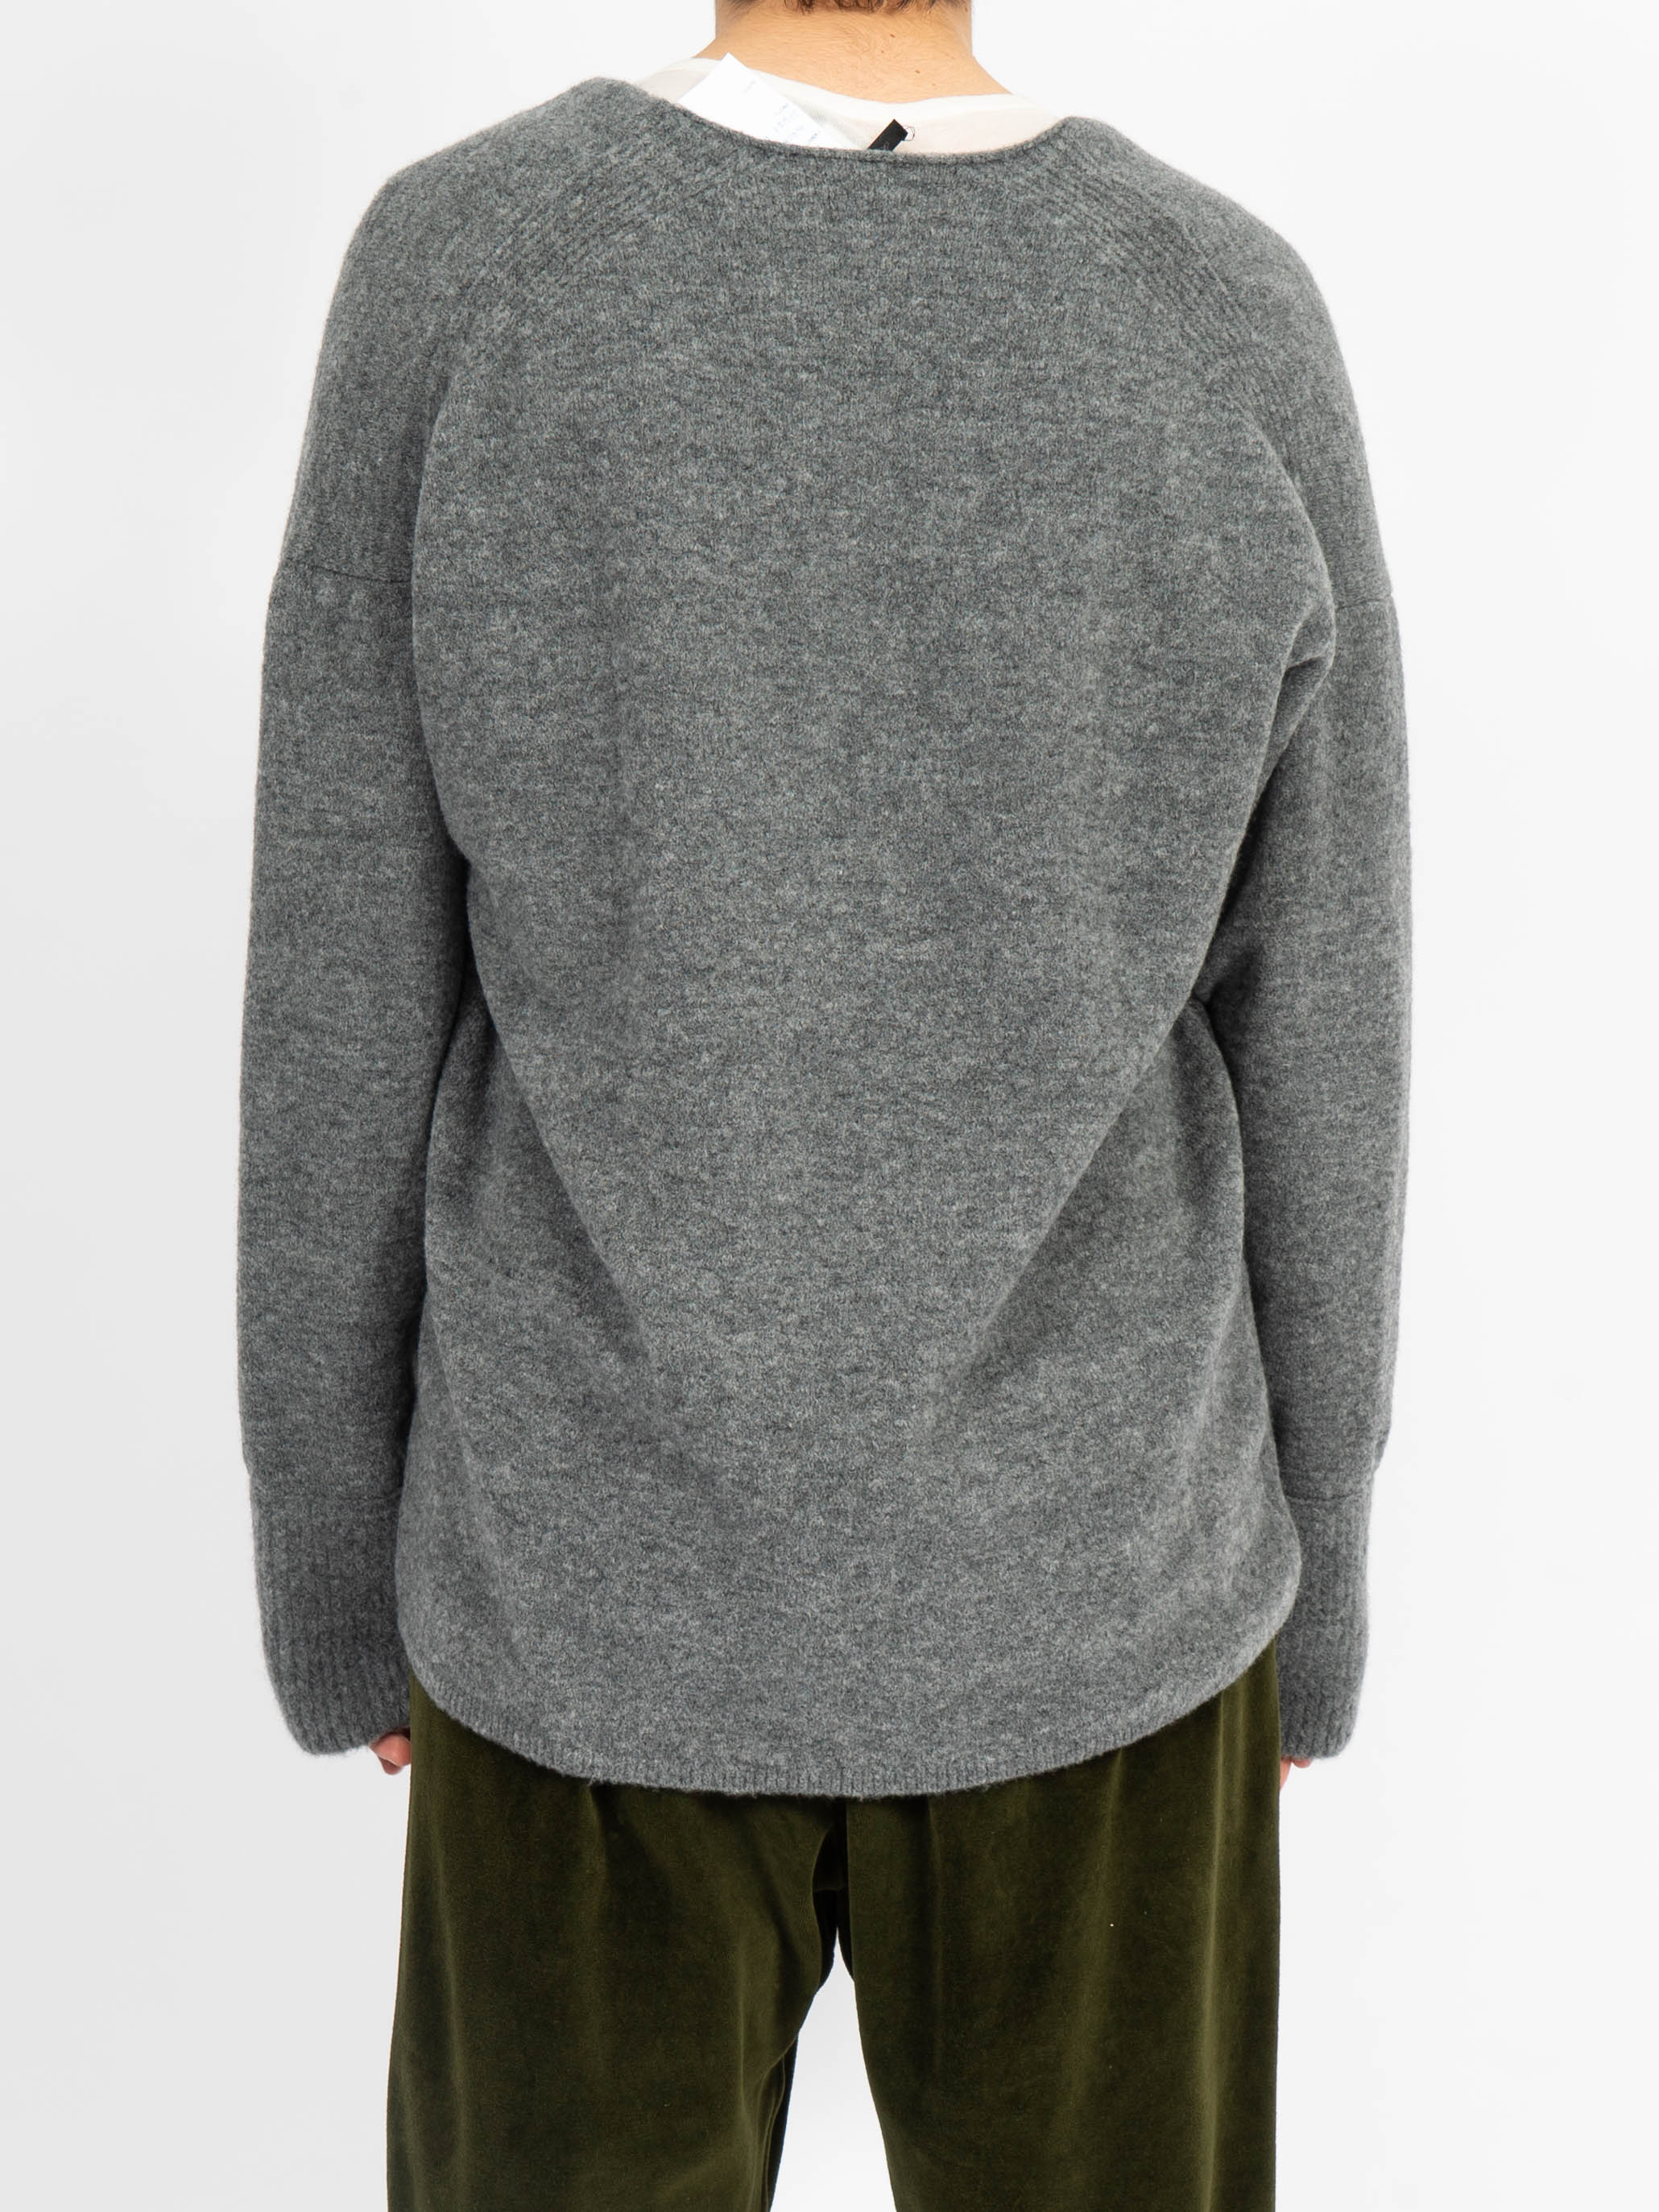 SS16 Relaxed V-Neck Knit Grey